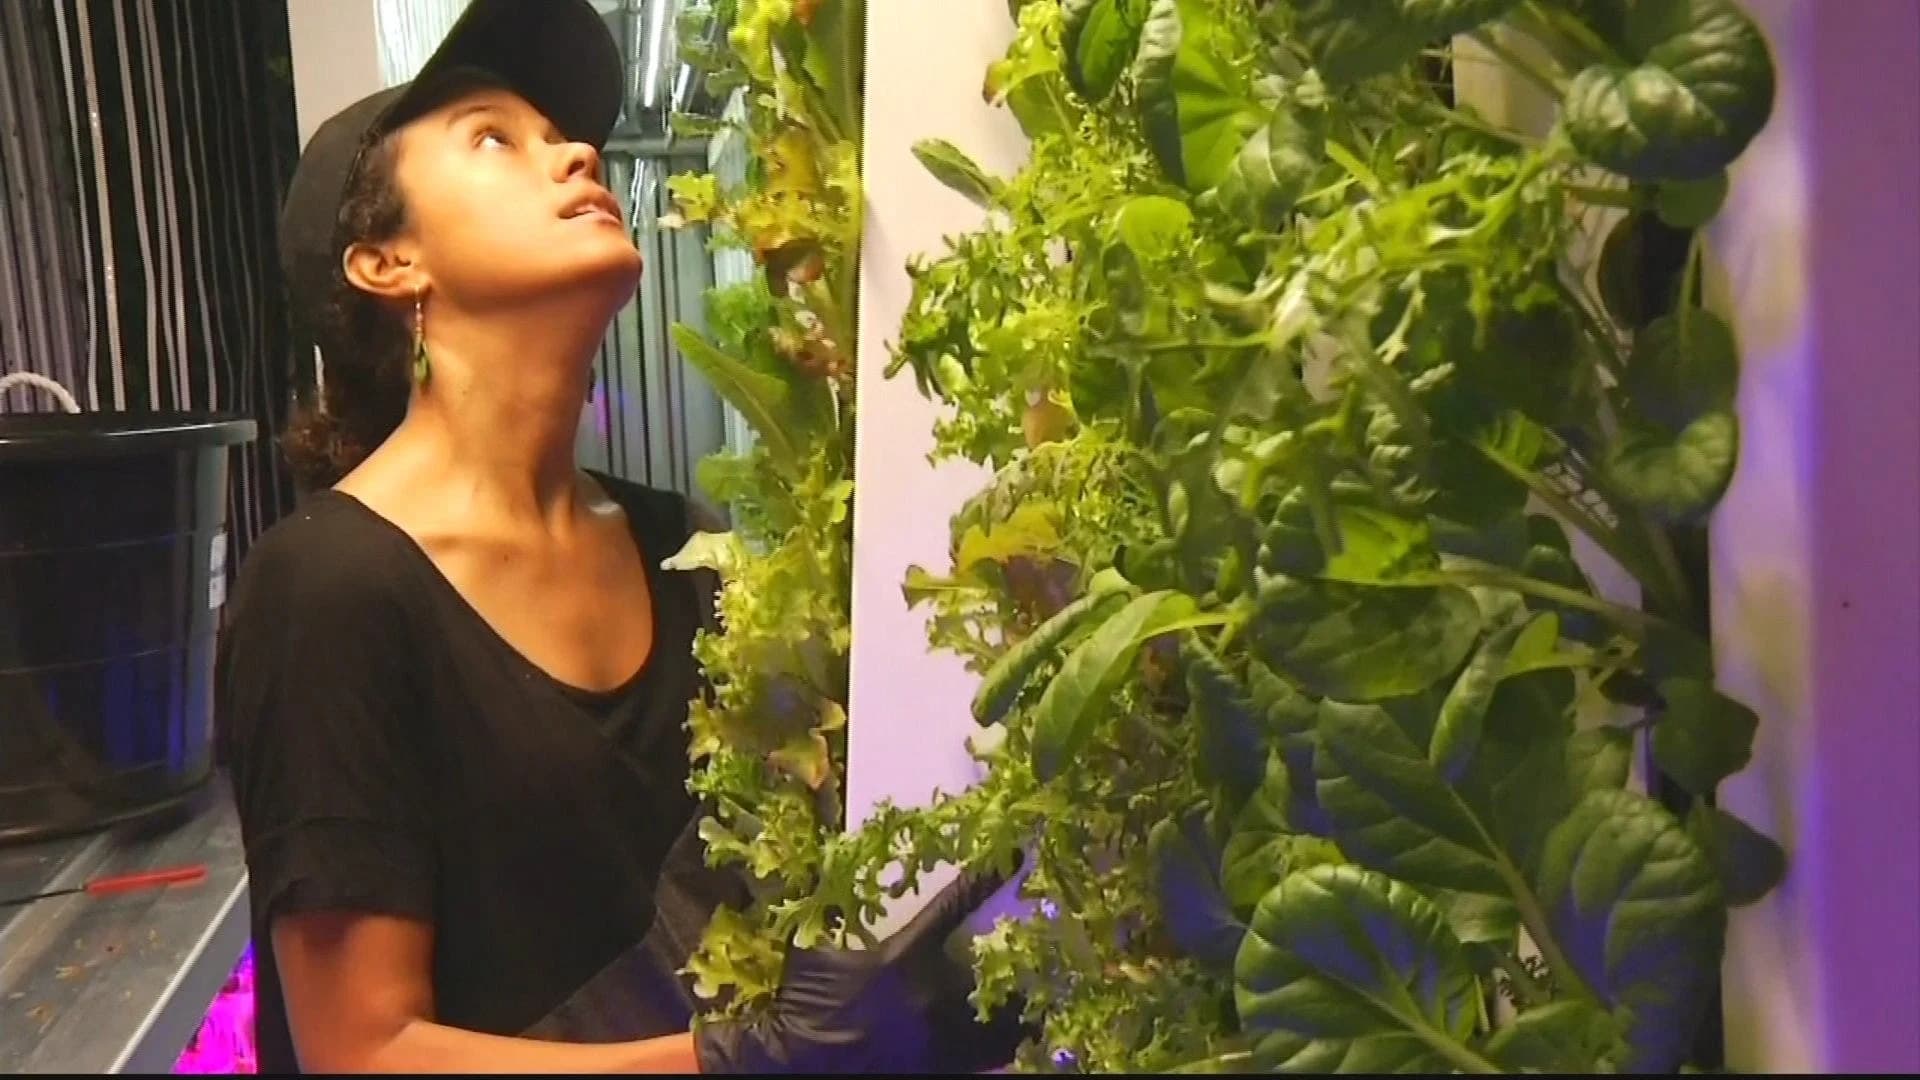 Urban farm in Bed-Stuy operates out of shipping containers